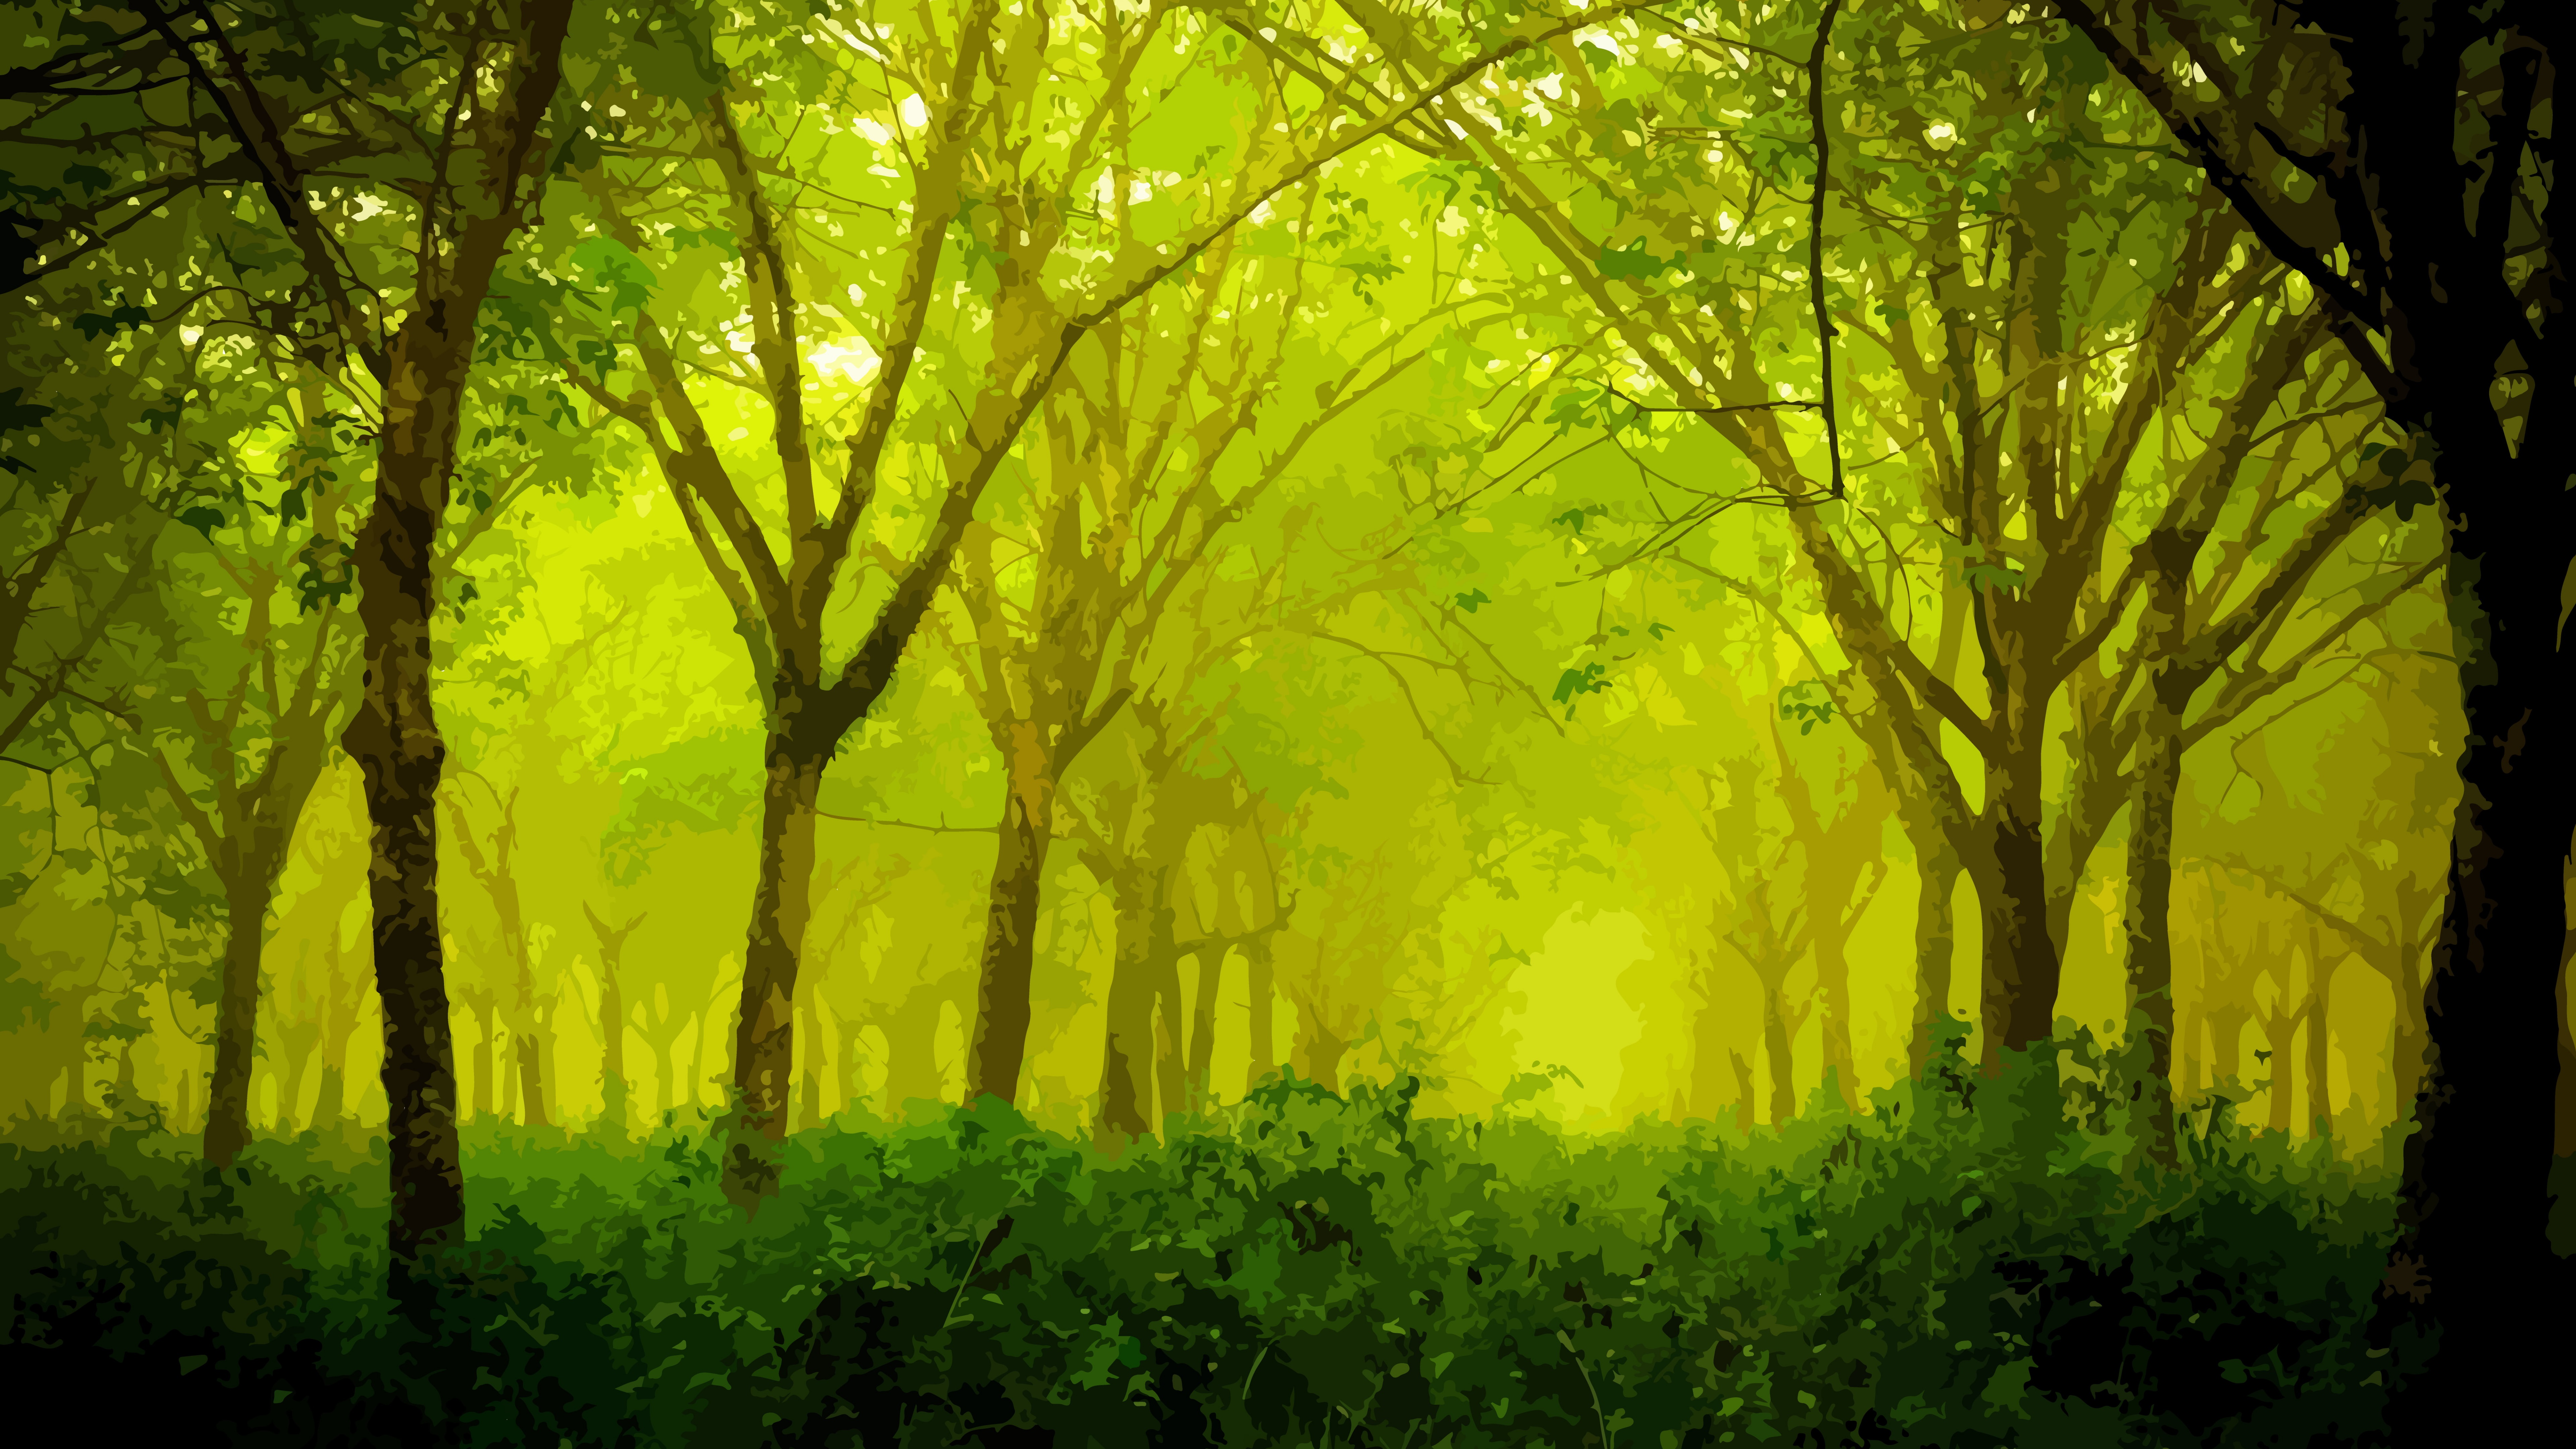 450 Greenery HD Wallpapers and Backgrounds